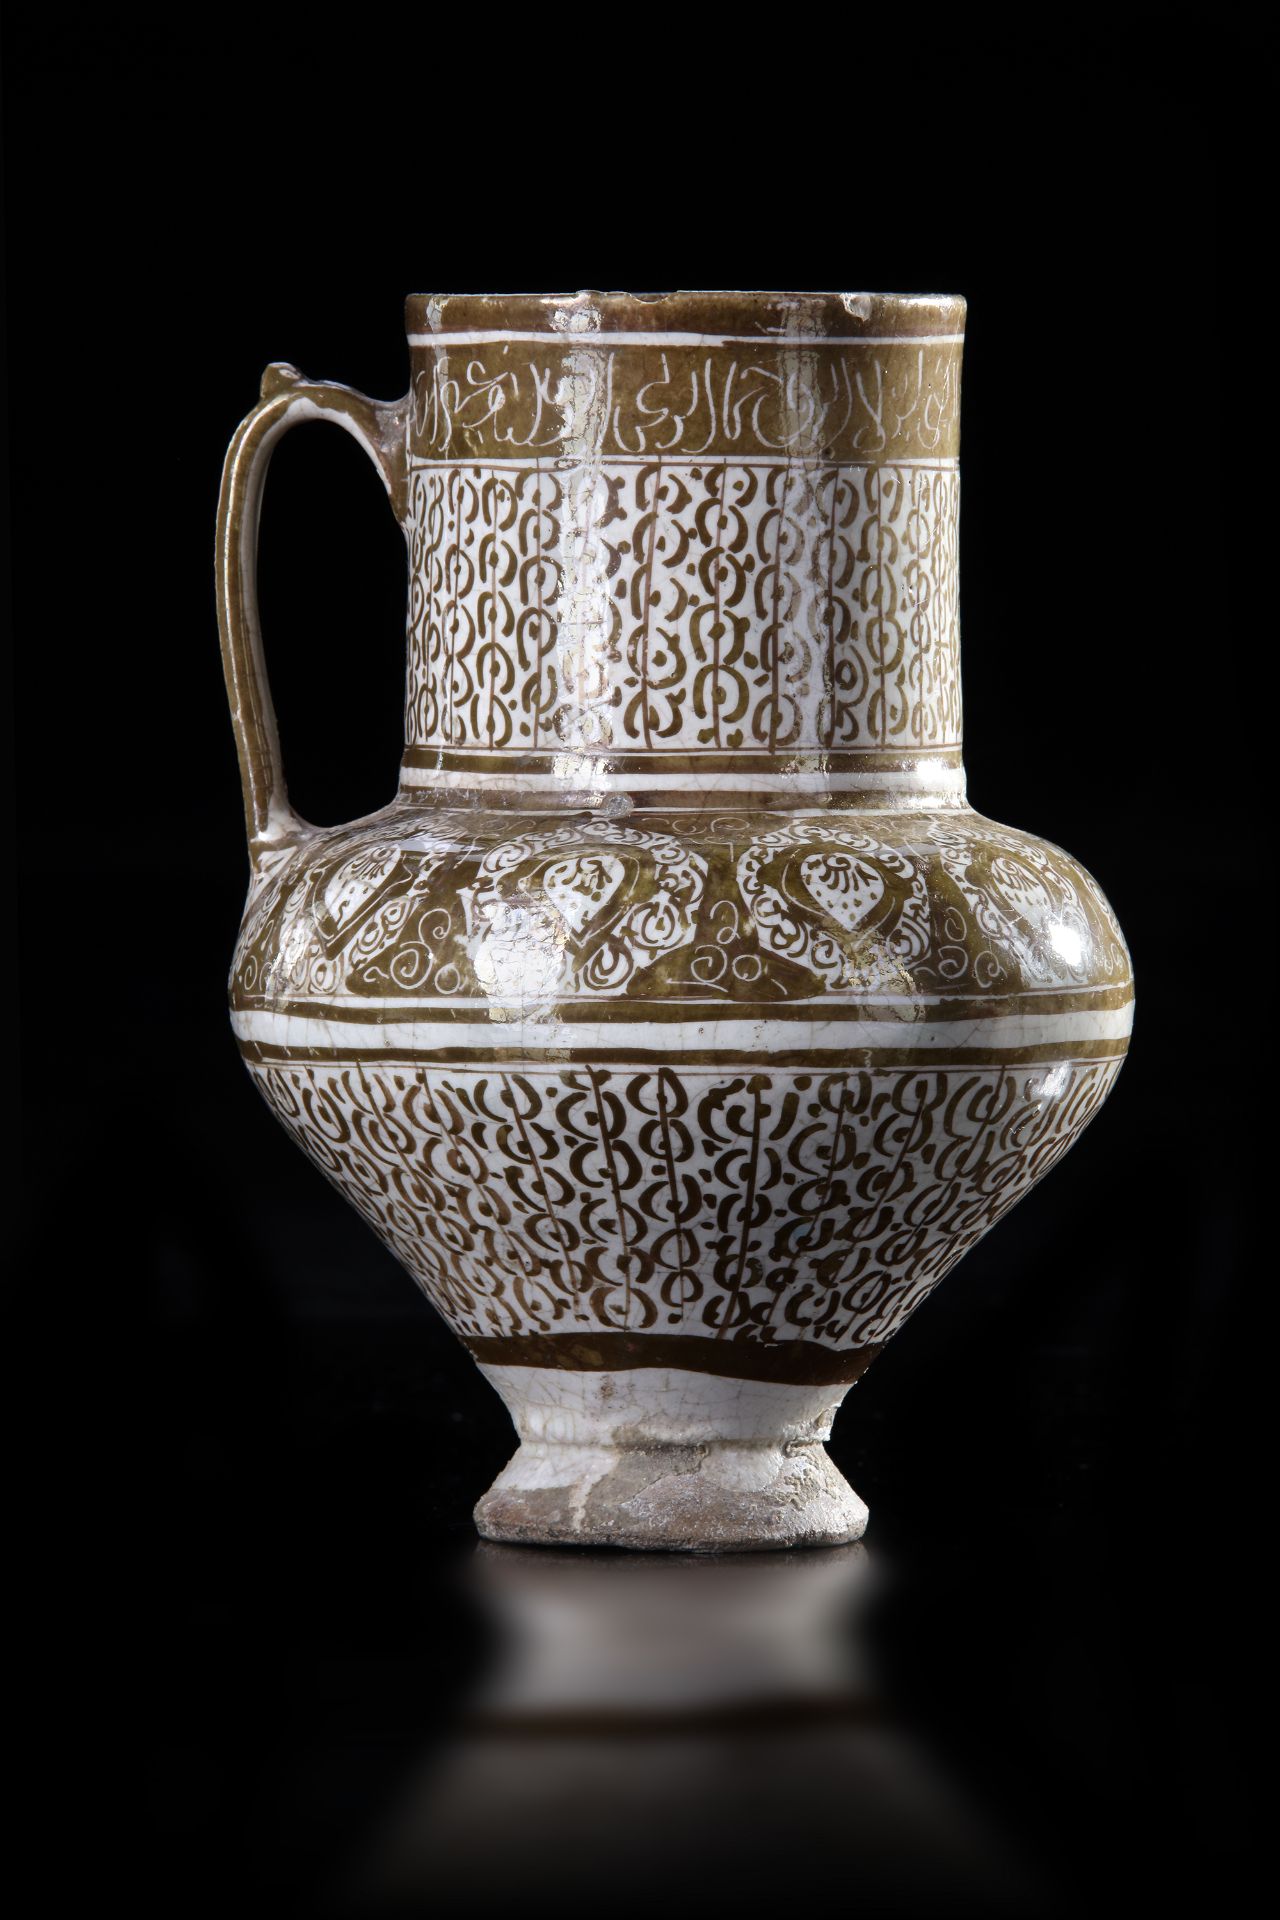 A KASHAN LUSTRE POTTERY JUG, PERSIA, 13TH CENTURY